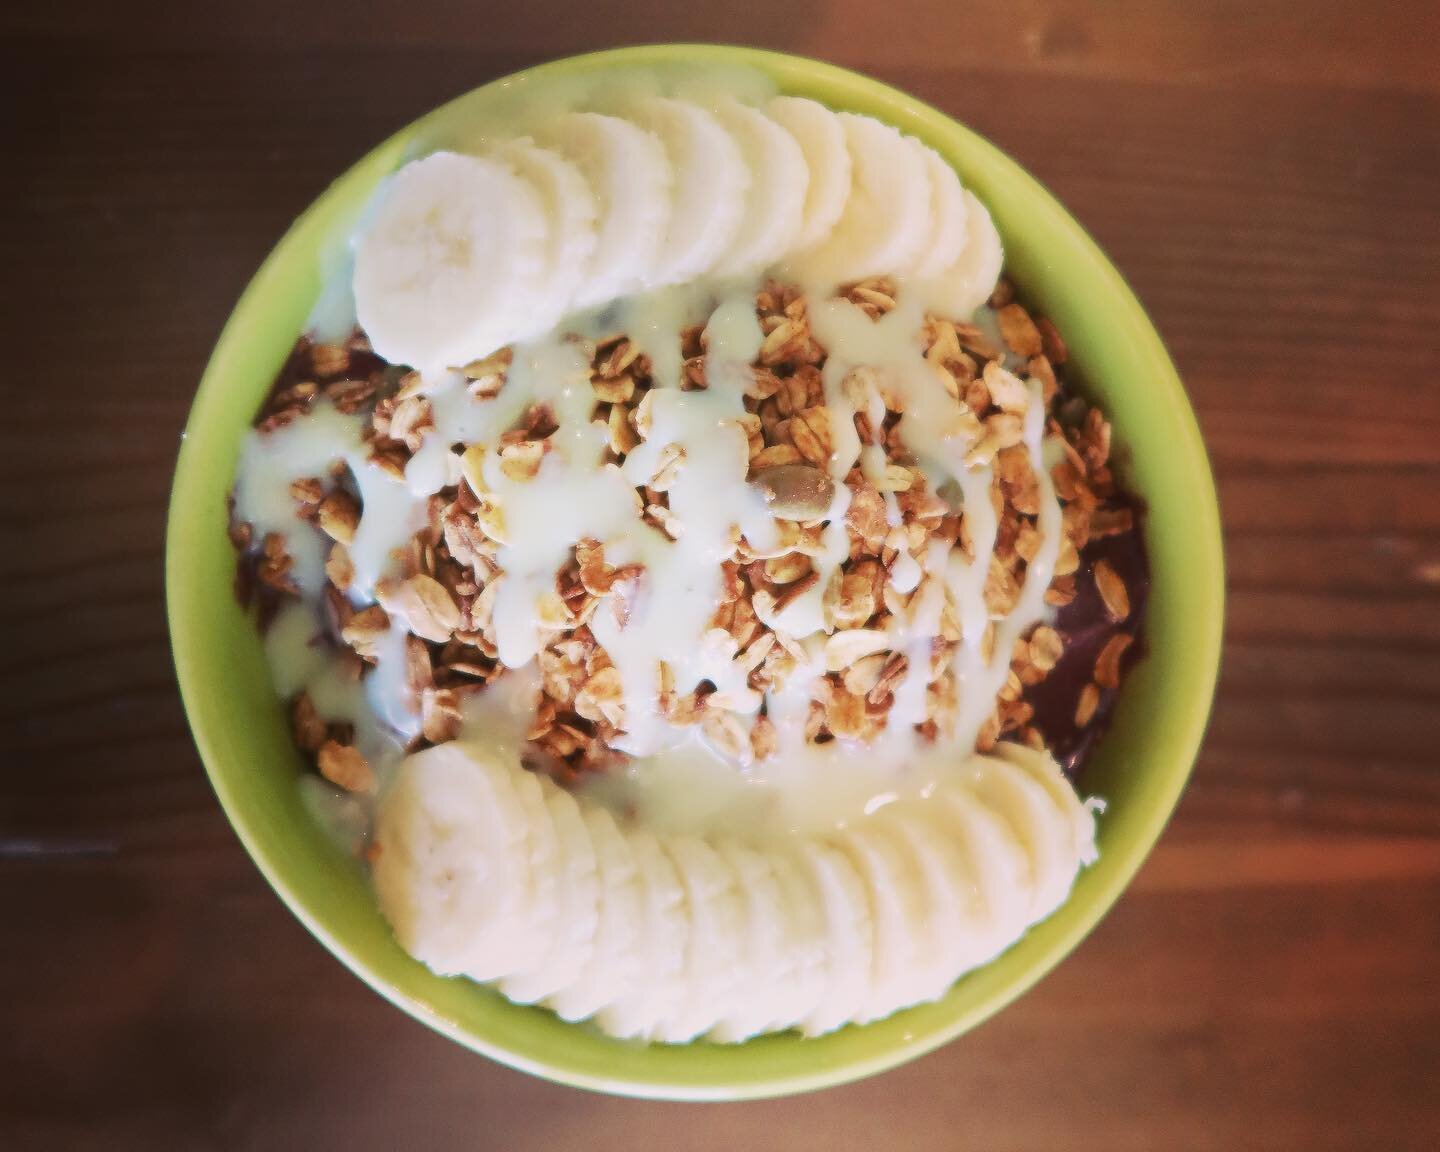 Order one of our premade bowls or add your own style. Link in bio to order for pickup or delivery. 

Traditional: A&ccedil;a&iacute; guaran&aacute;, banana, Apple/citrus juice blend. Topped with Granola, Fresh banana, Condensed milk.

Falsa Baiana: A